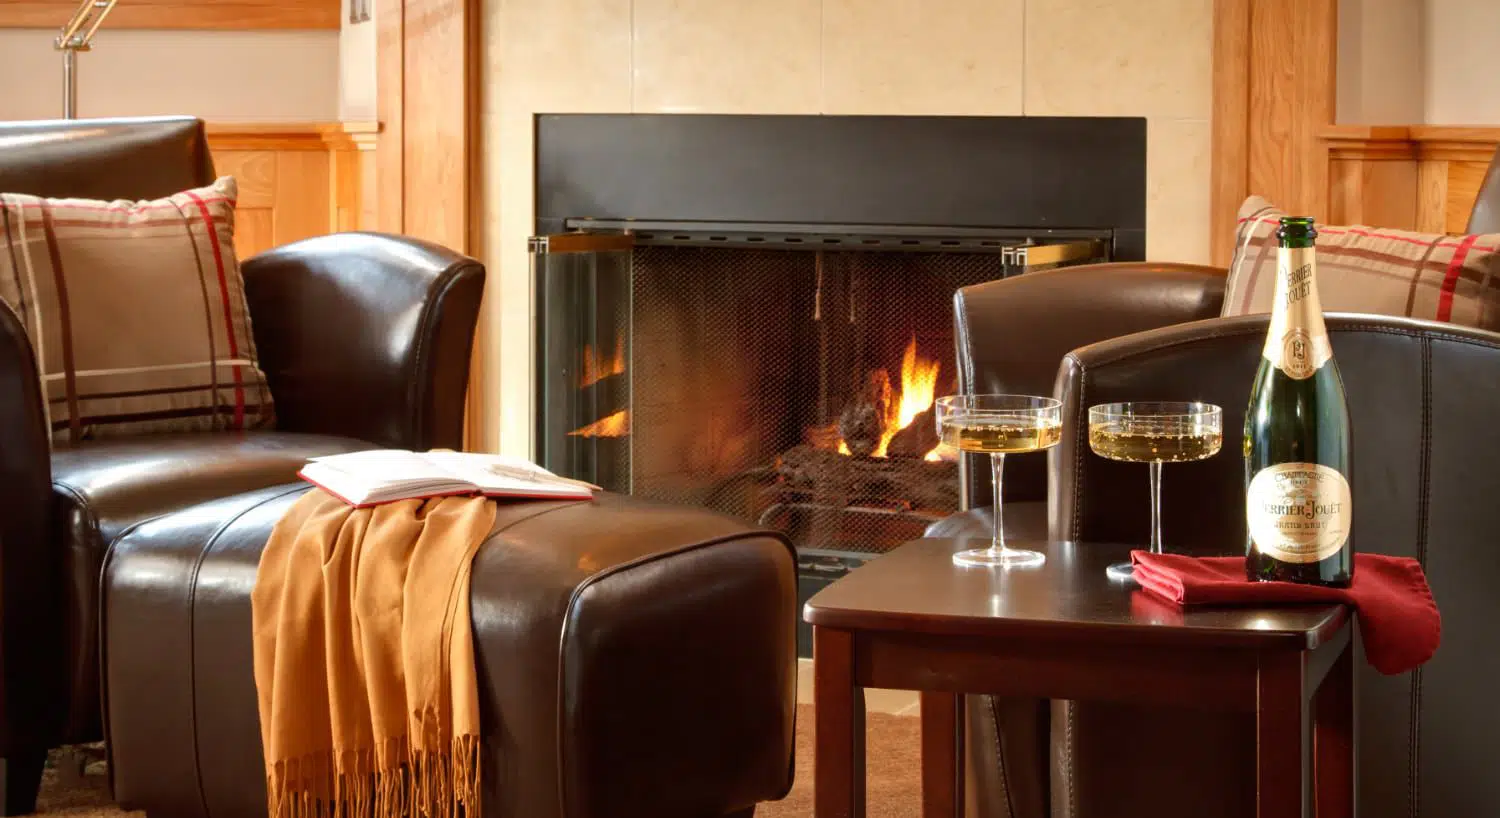 Close up view of sitting area with dark brown leather chairs, wooden end table, glasses full of wine, and a fireplace